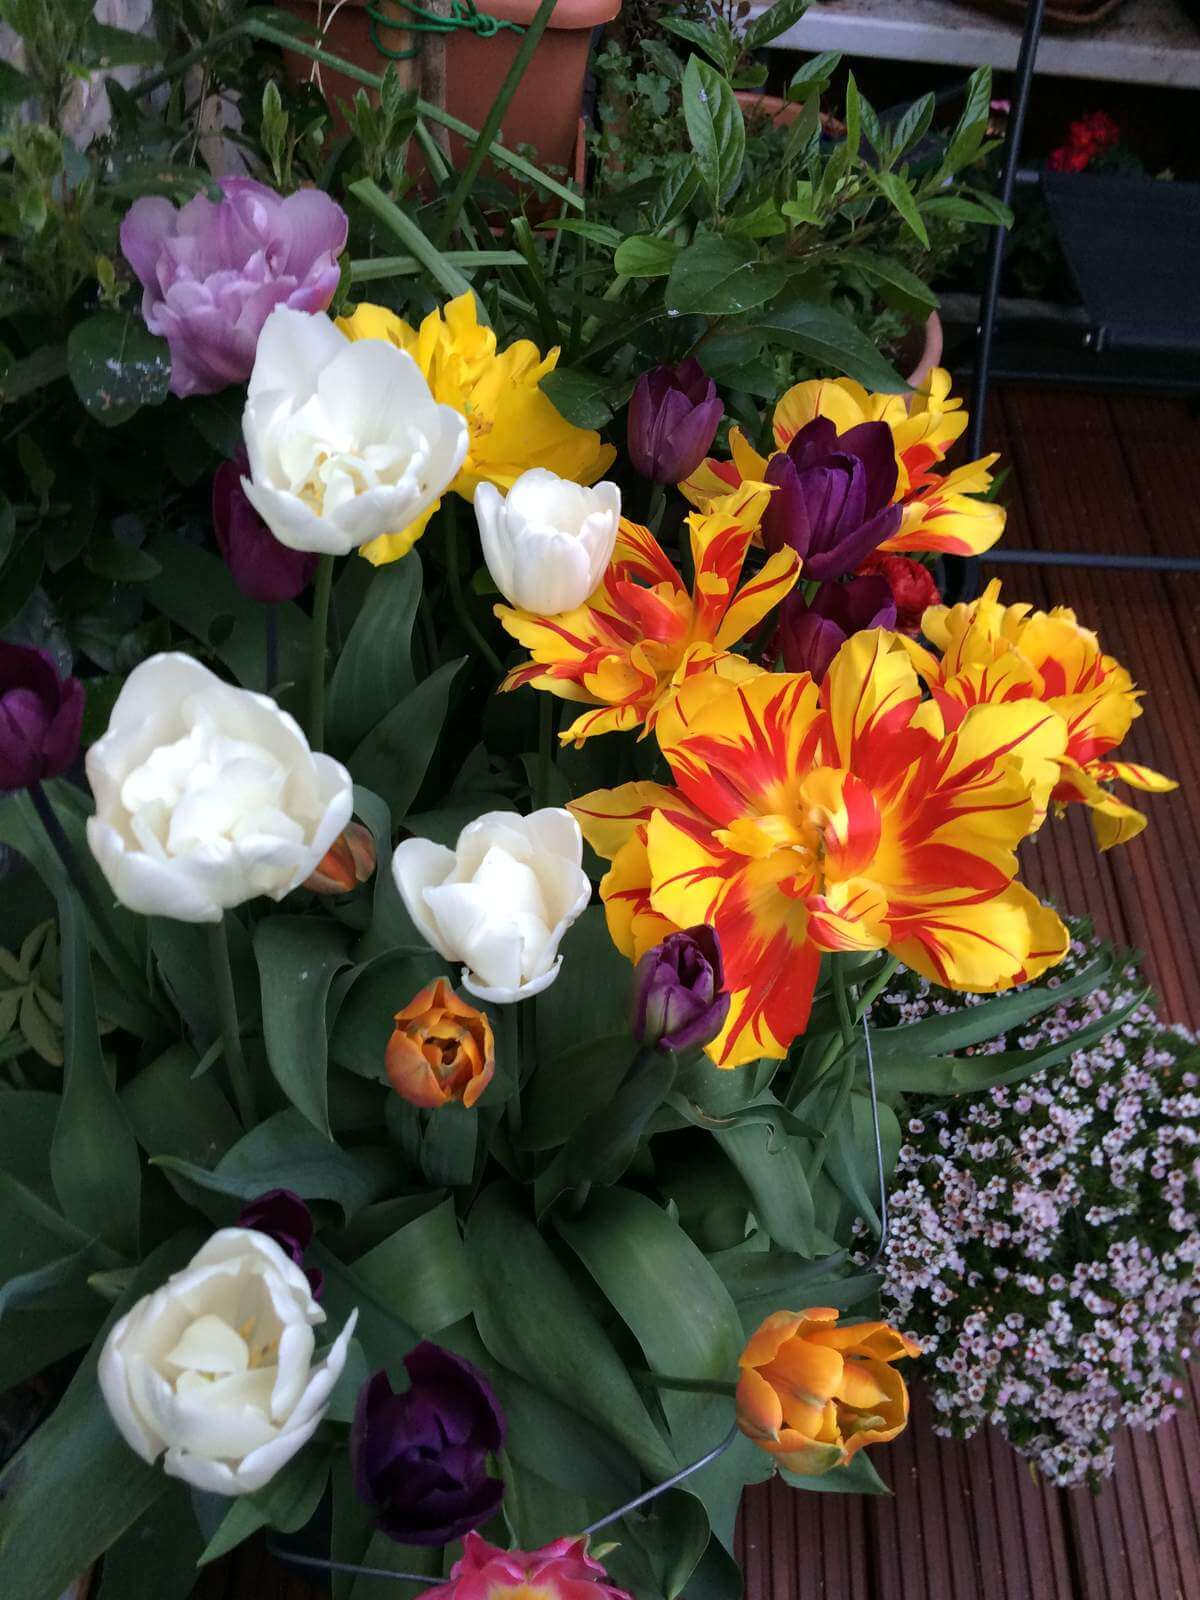 Some gorgeous tulips on display in SeedySalford's garden